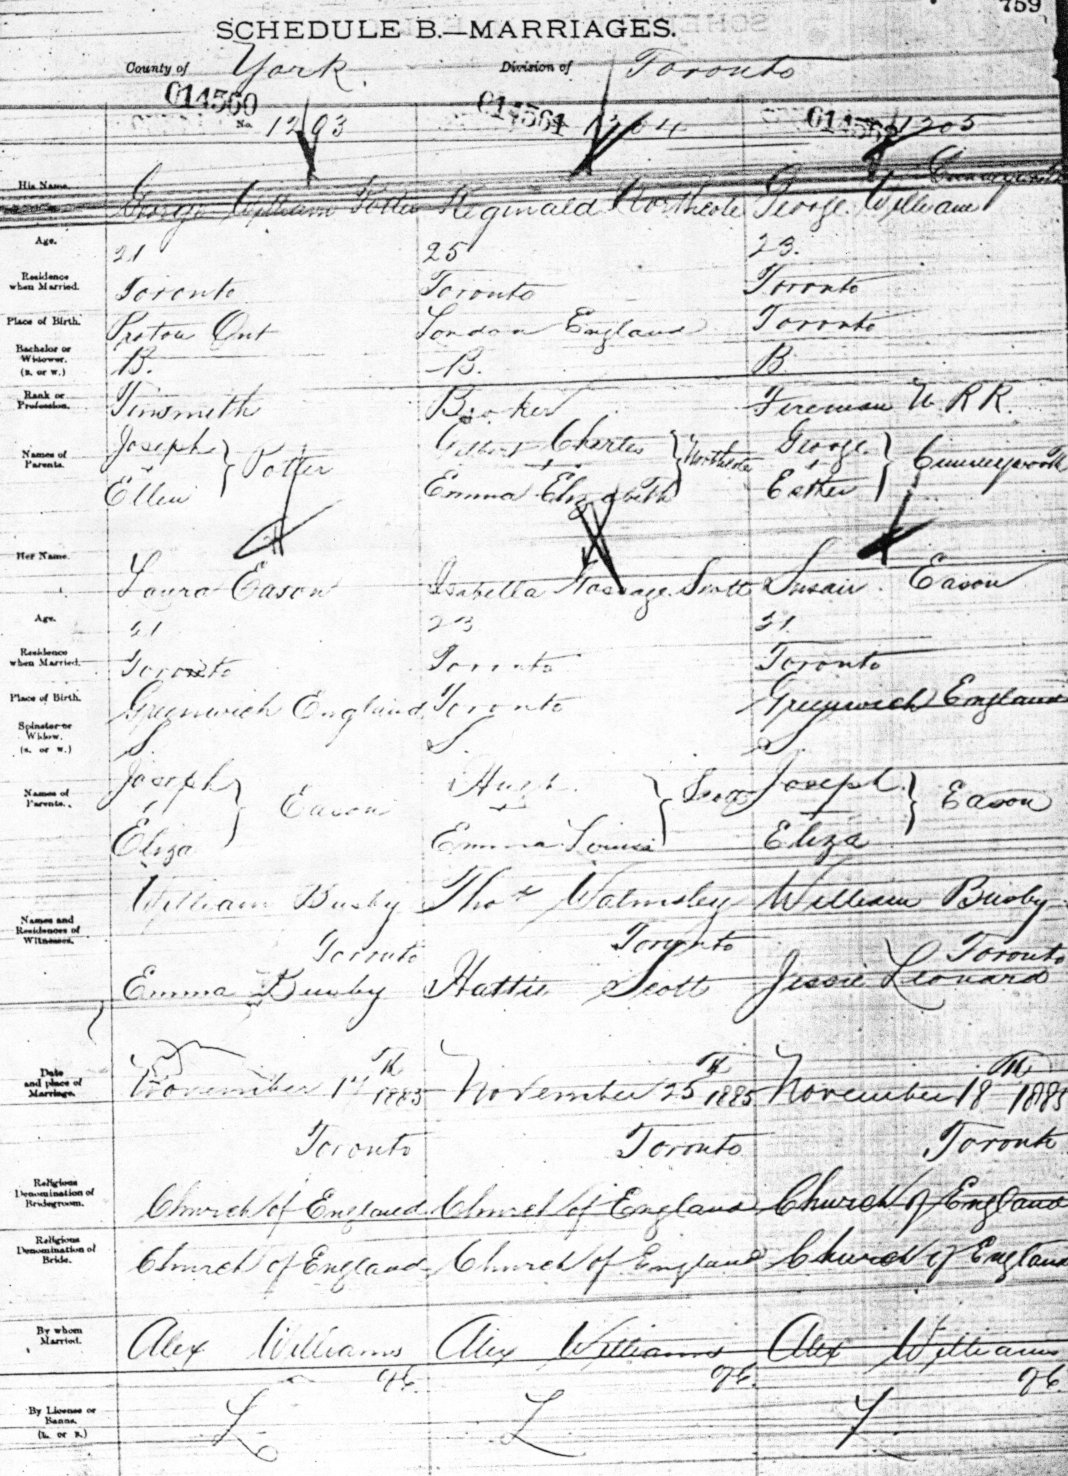 George and Susan's marriage registration